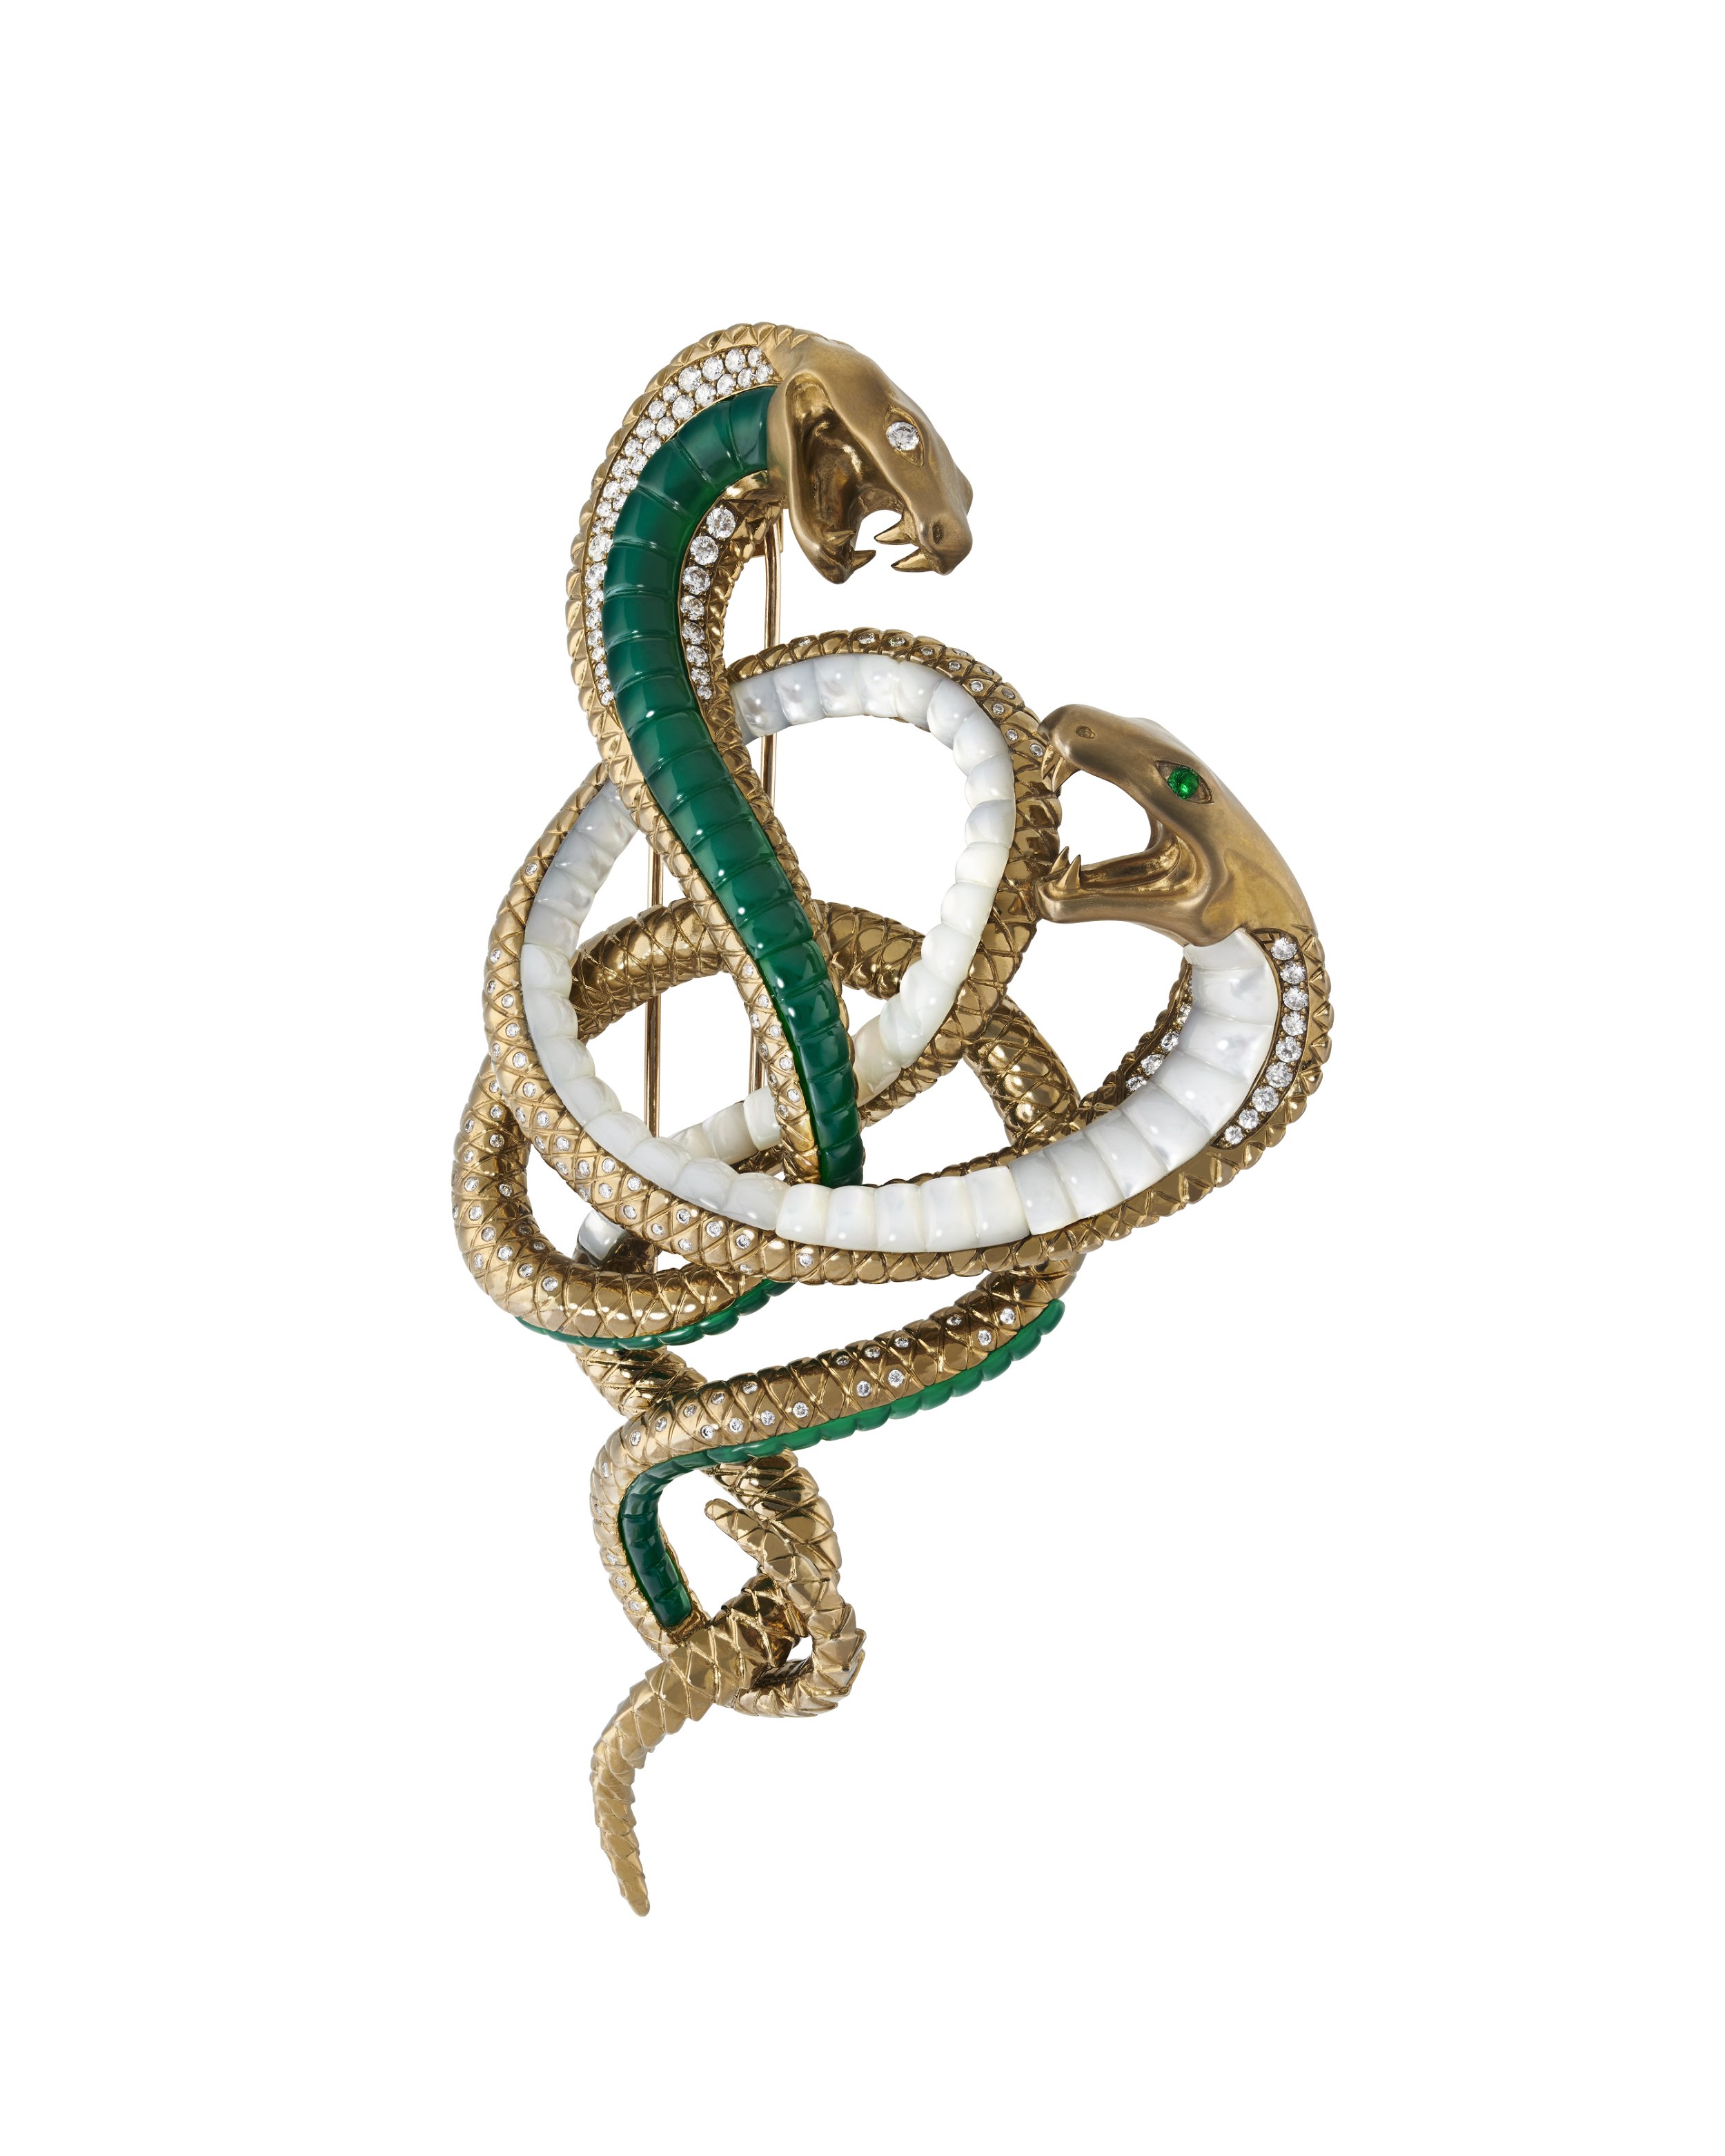 Sworn Enemies Master & Serpent Brooch with Emeralds, Agates, Pearls and Diamonds in Titanium and 18kt Yellow Gold